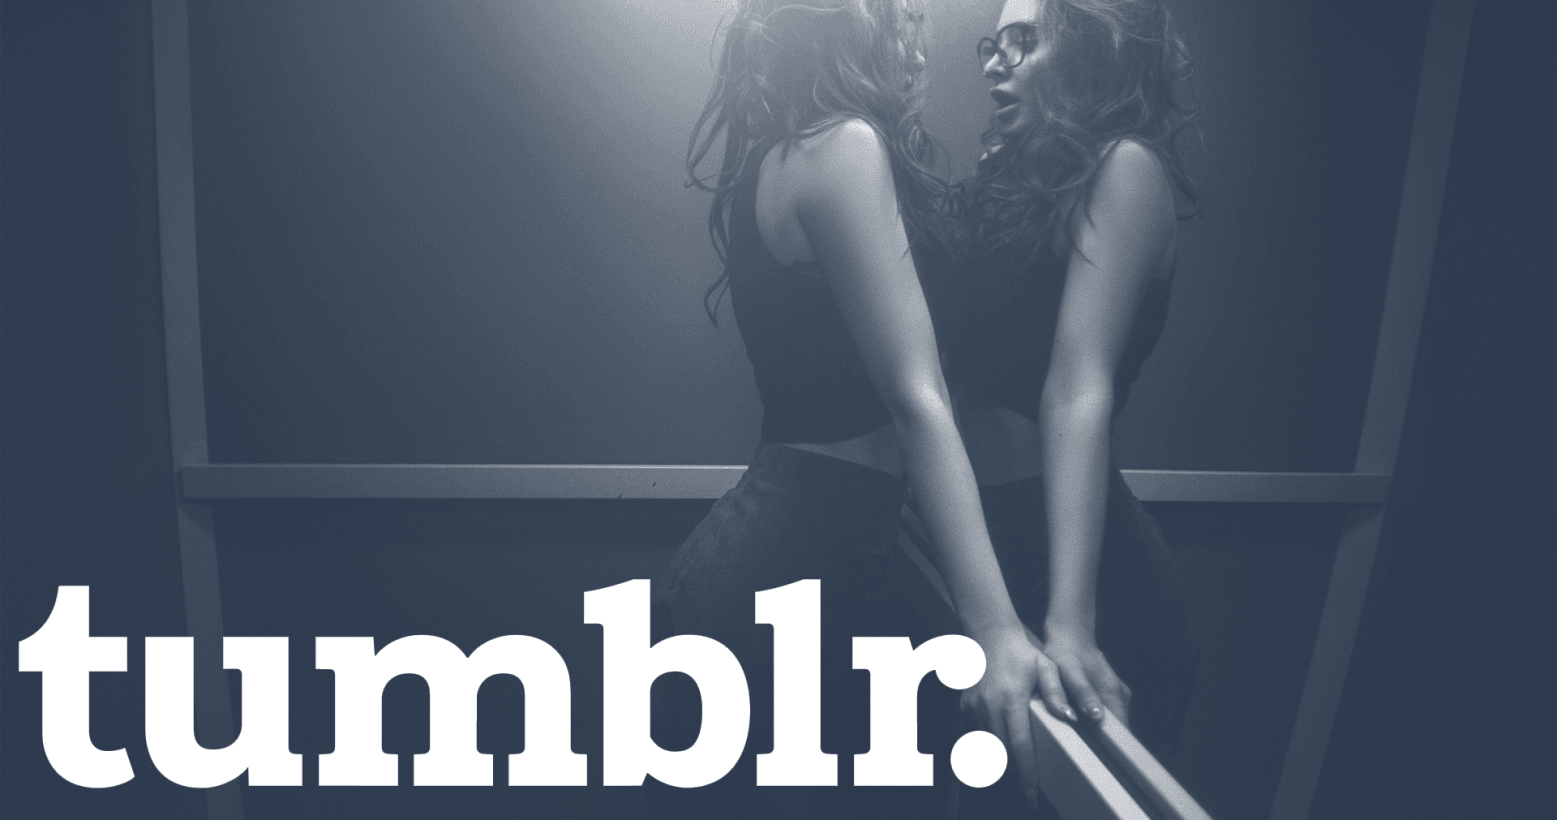 Erotica Porn Tumblr - Tumblr's porn ban slams the door on women and other ...